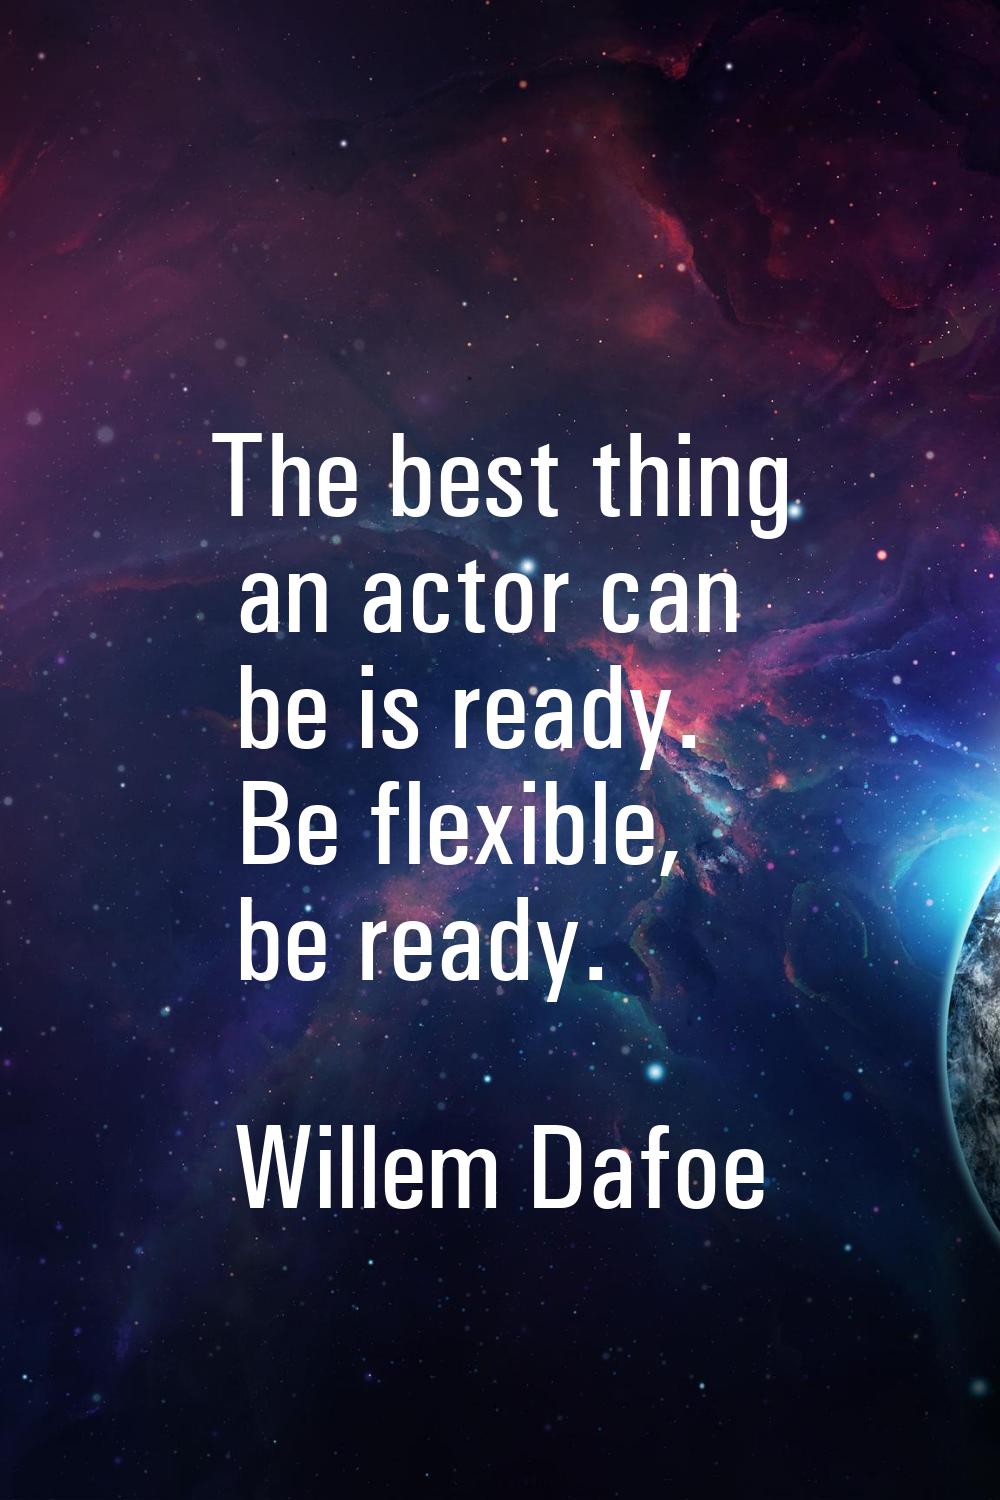 The best thing an actor can be is ready. Be flexible, be ready.